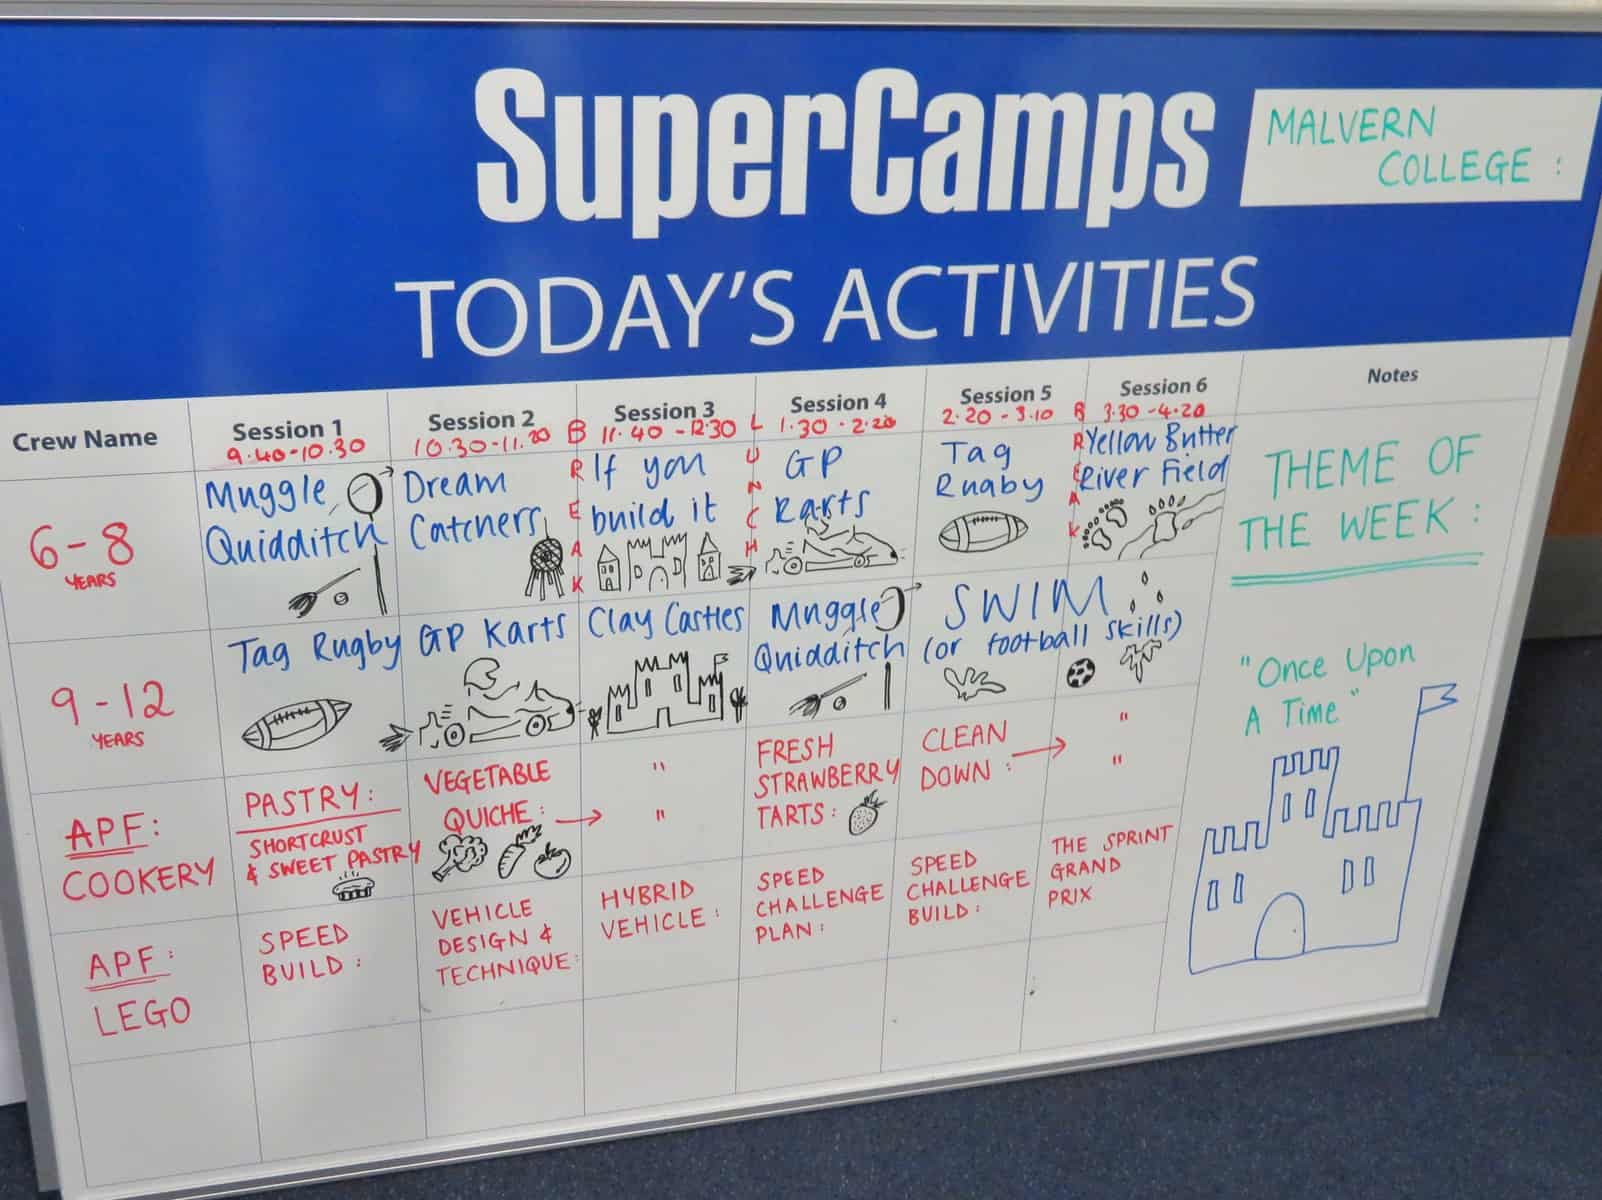 Super Camps Malvern College activities written on a white board